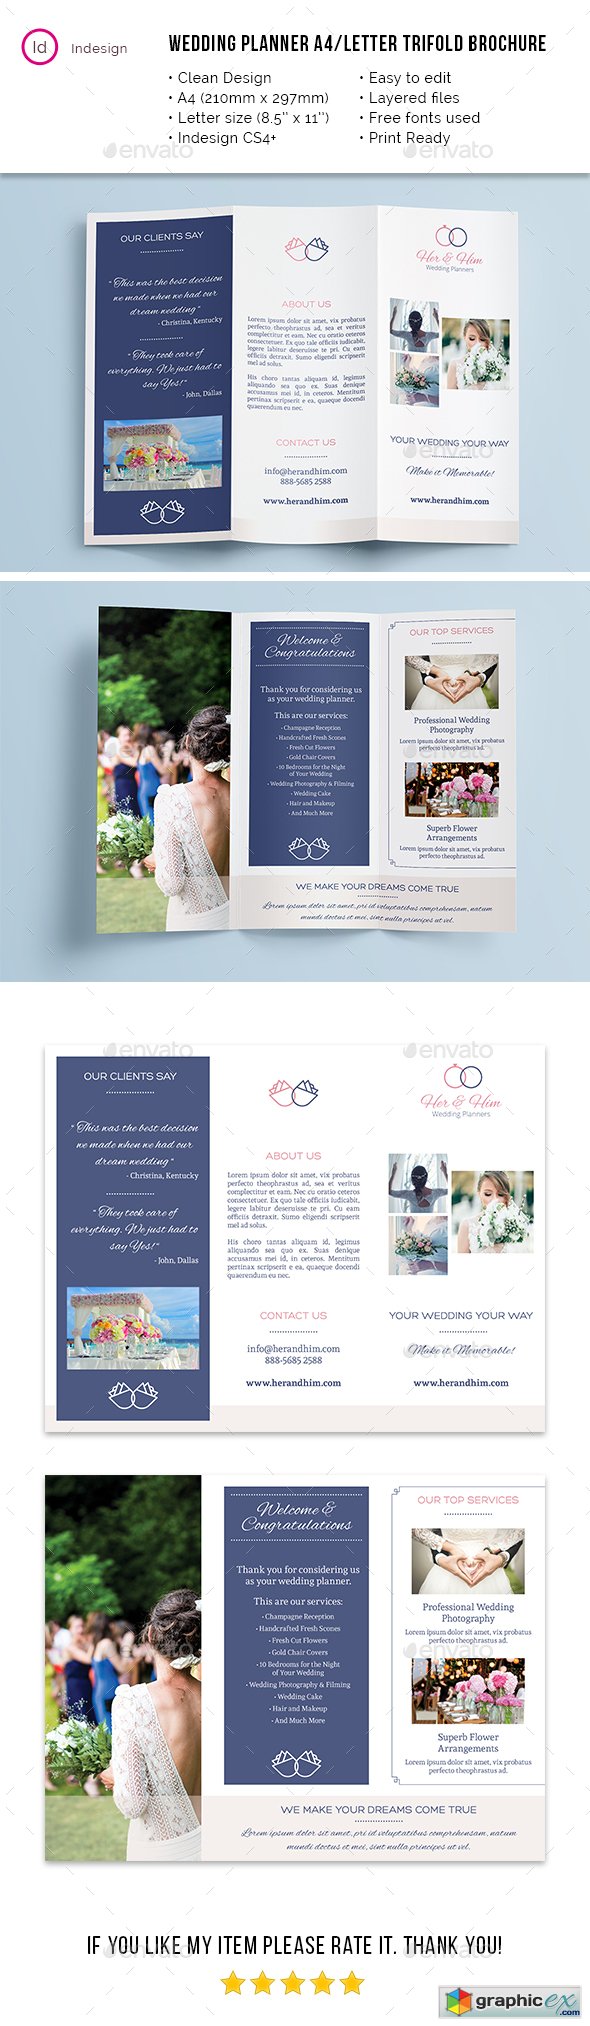 Wedding Planner A4 Letter Trifold